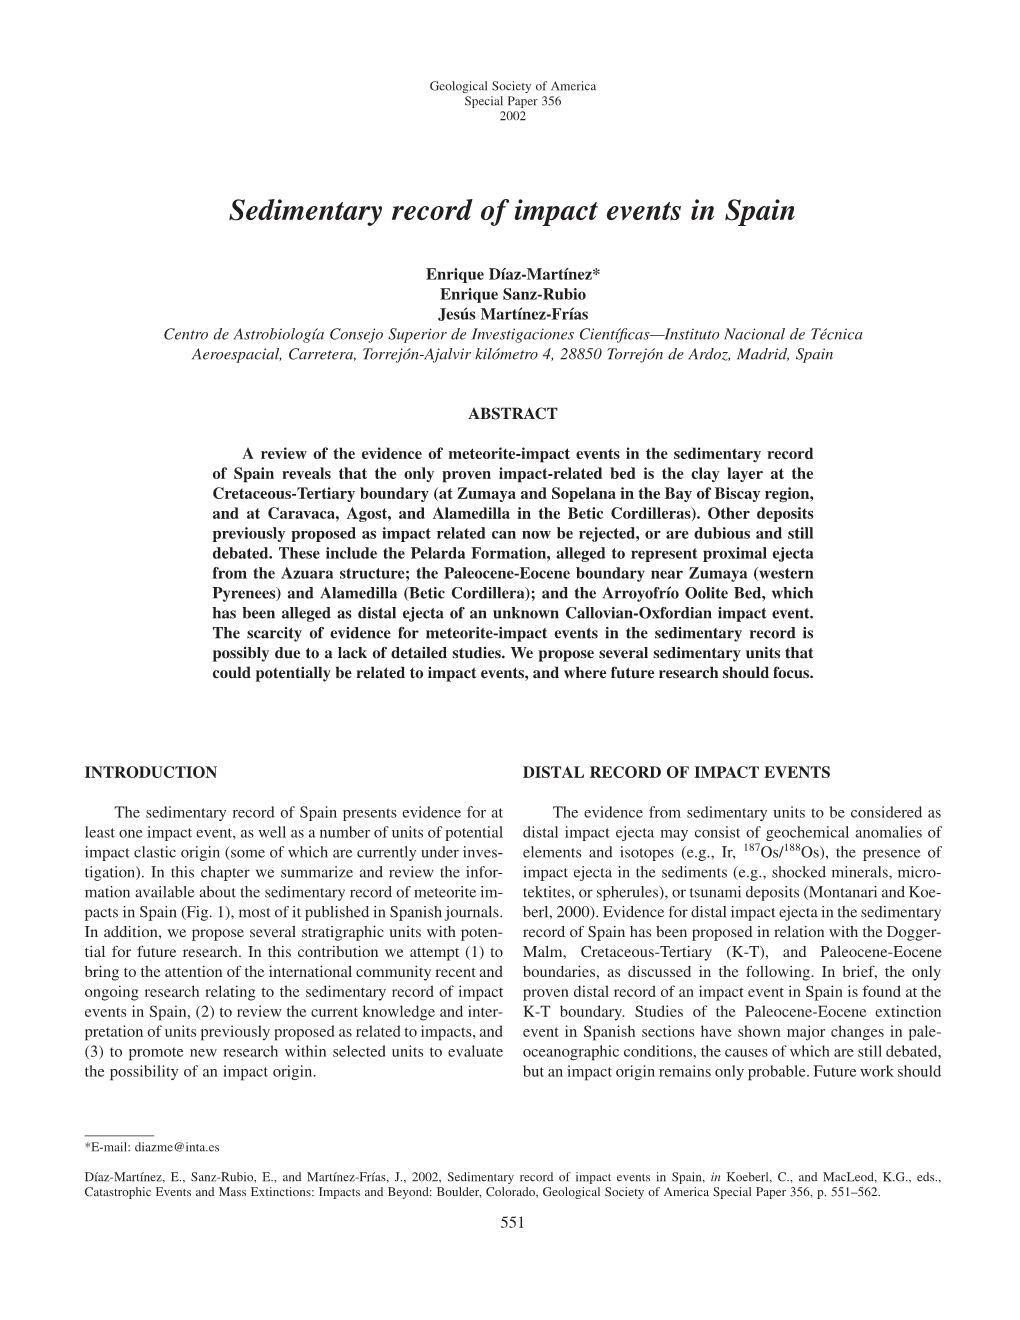 Sedimentary Record of Impact Events in Spain